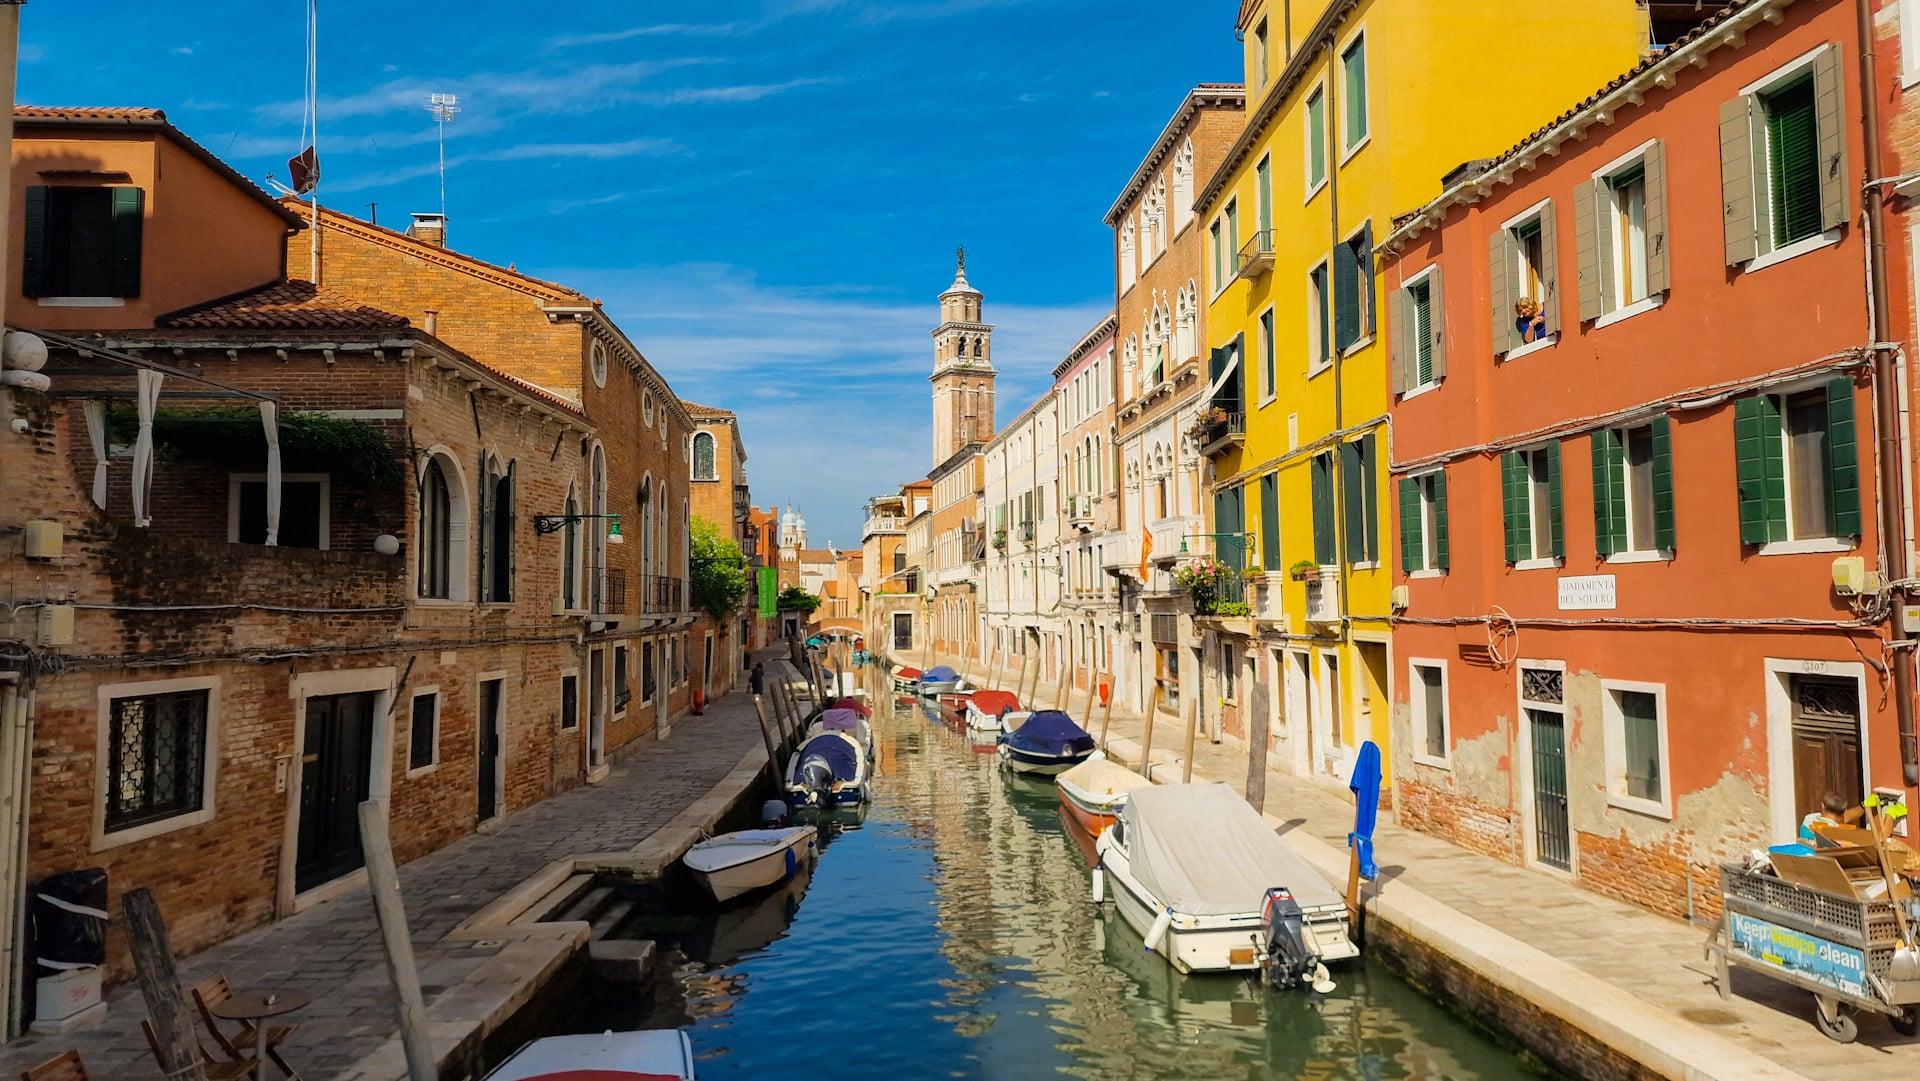 Dorsoduro is one of the most charming districts in Venice